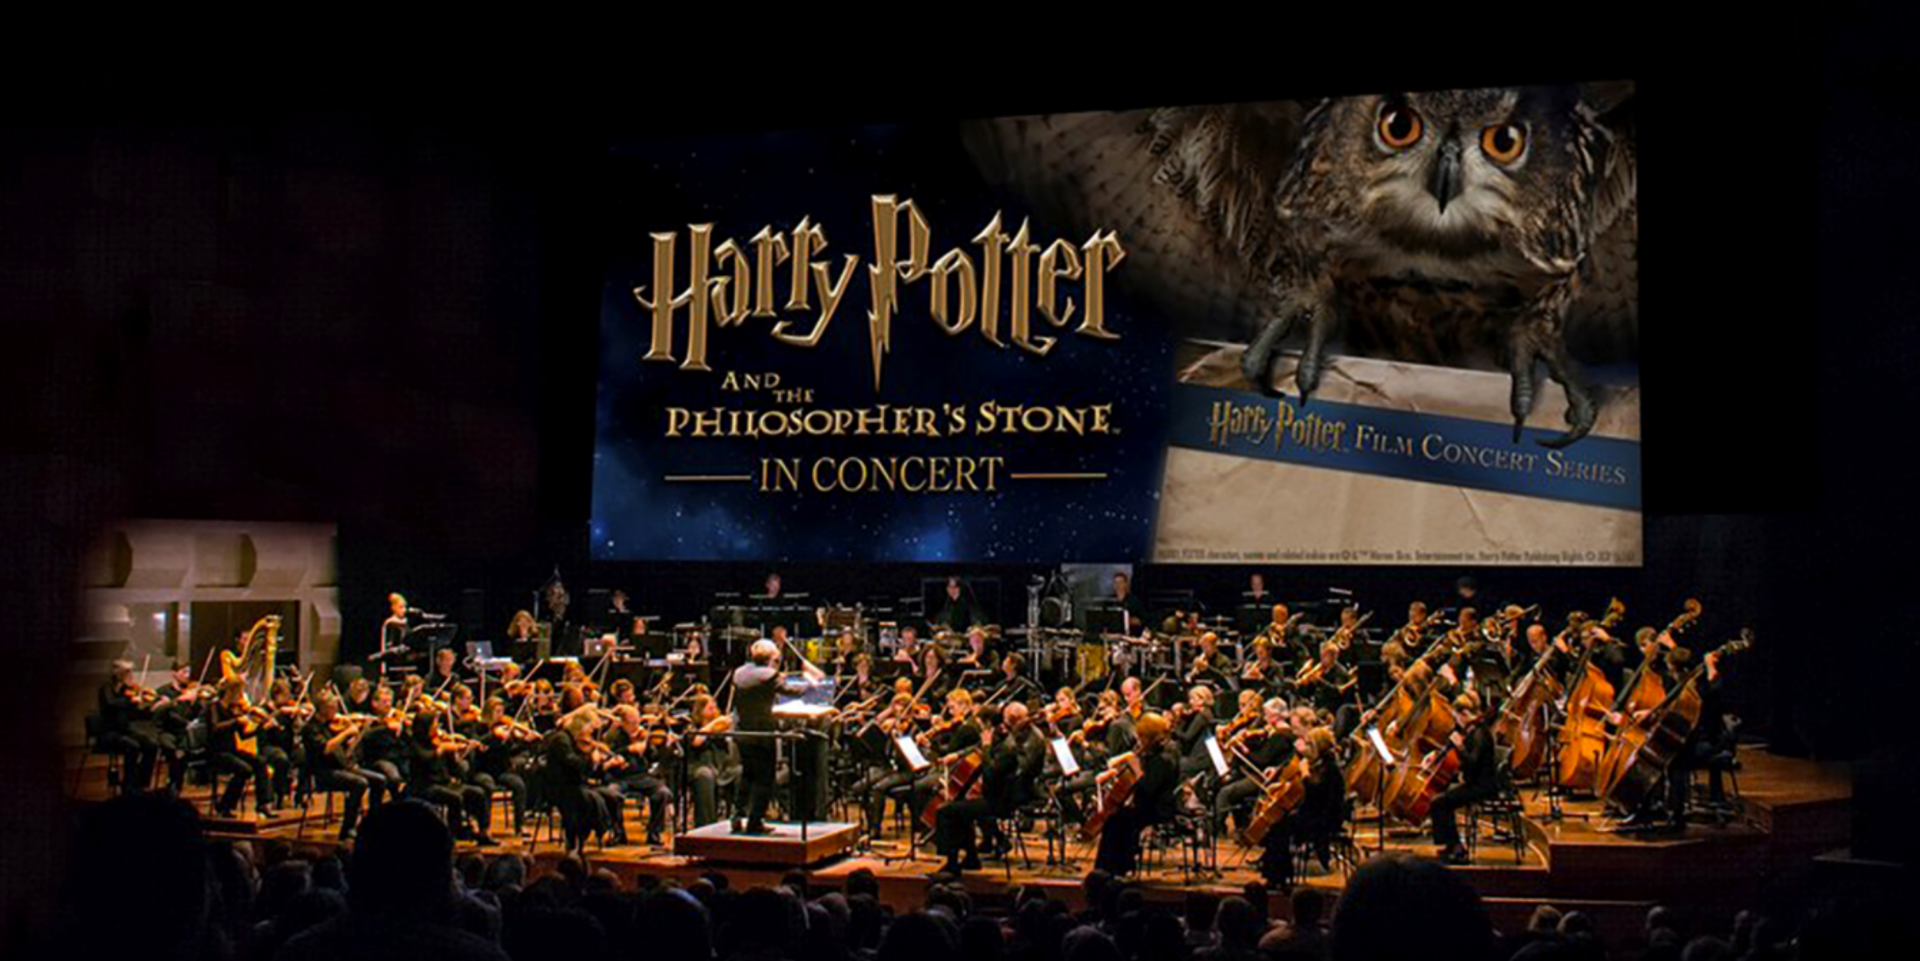 An orchestra will perform the Harry Potter and the Philosopher's Stone score live in Singapore